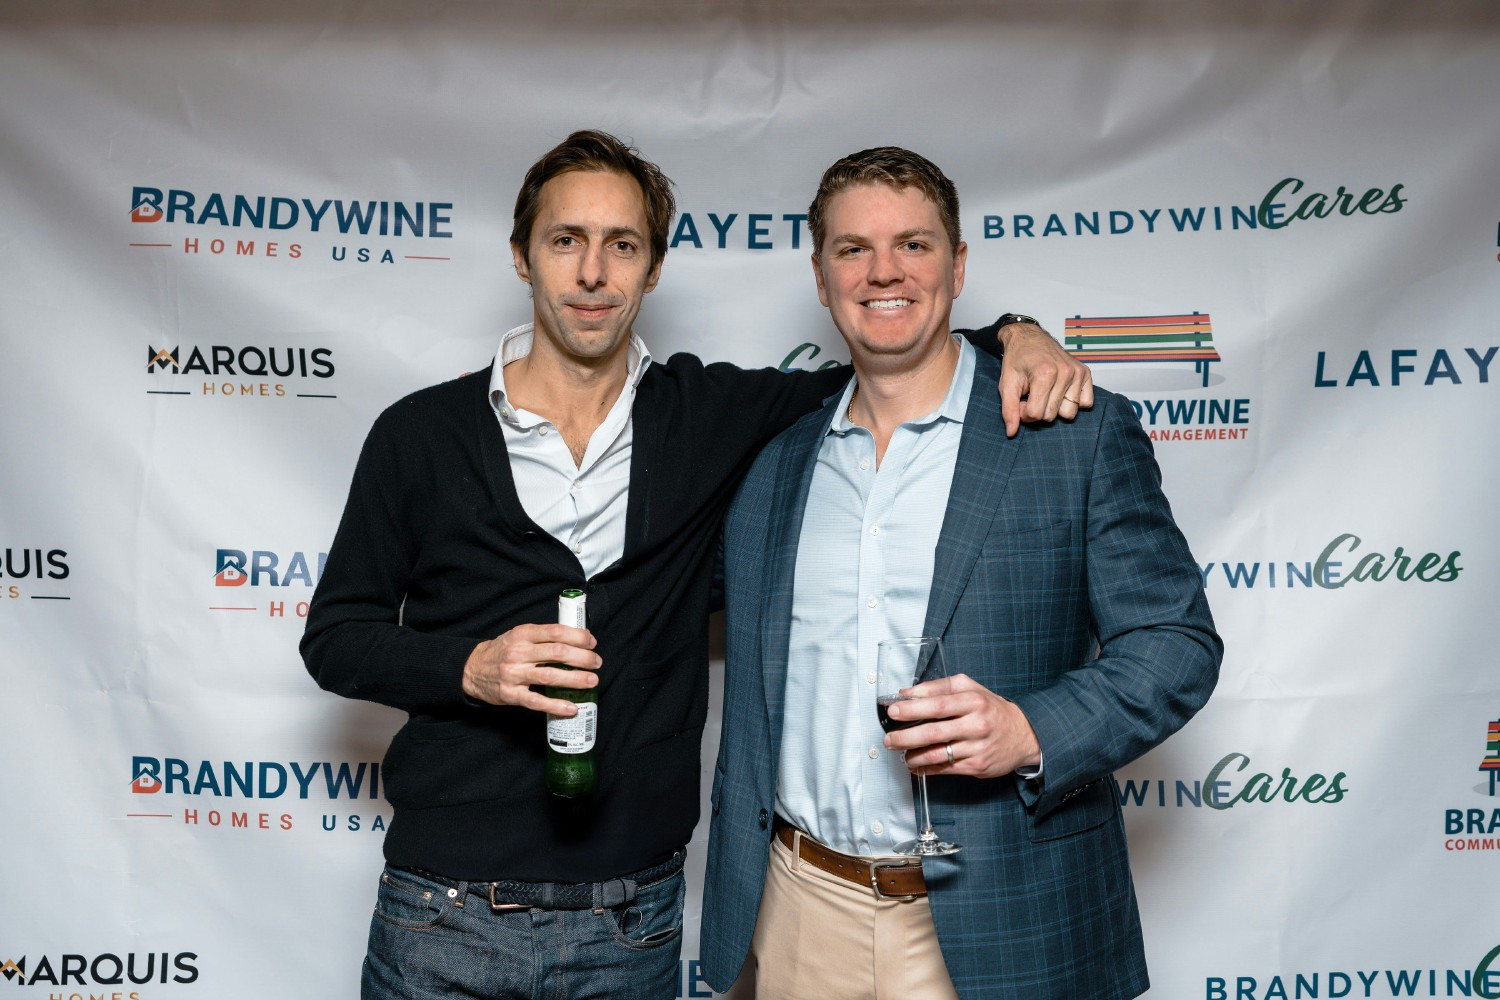 A decade of partnership, a lifetime of friendship: CEO Thibault and COO Chris celebrate ten years together